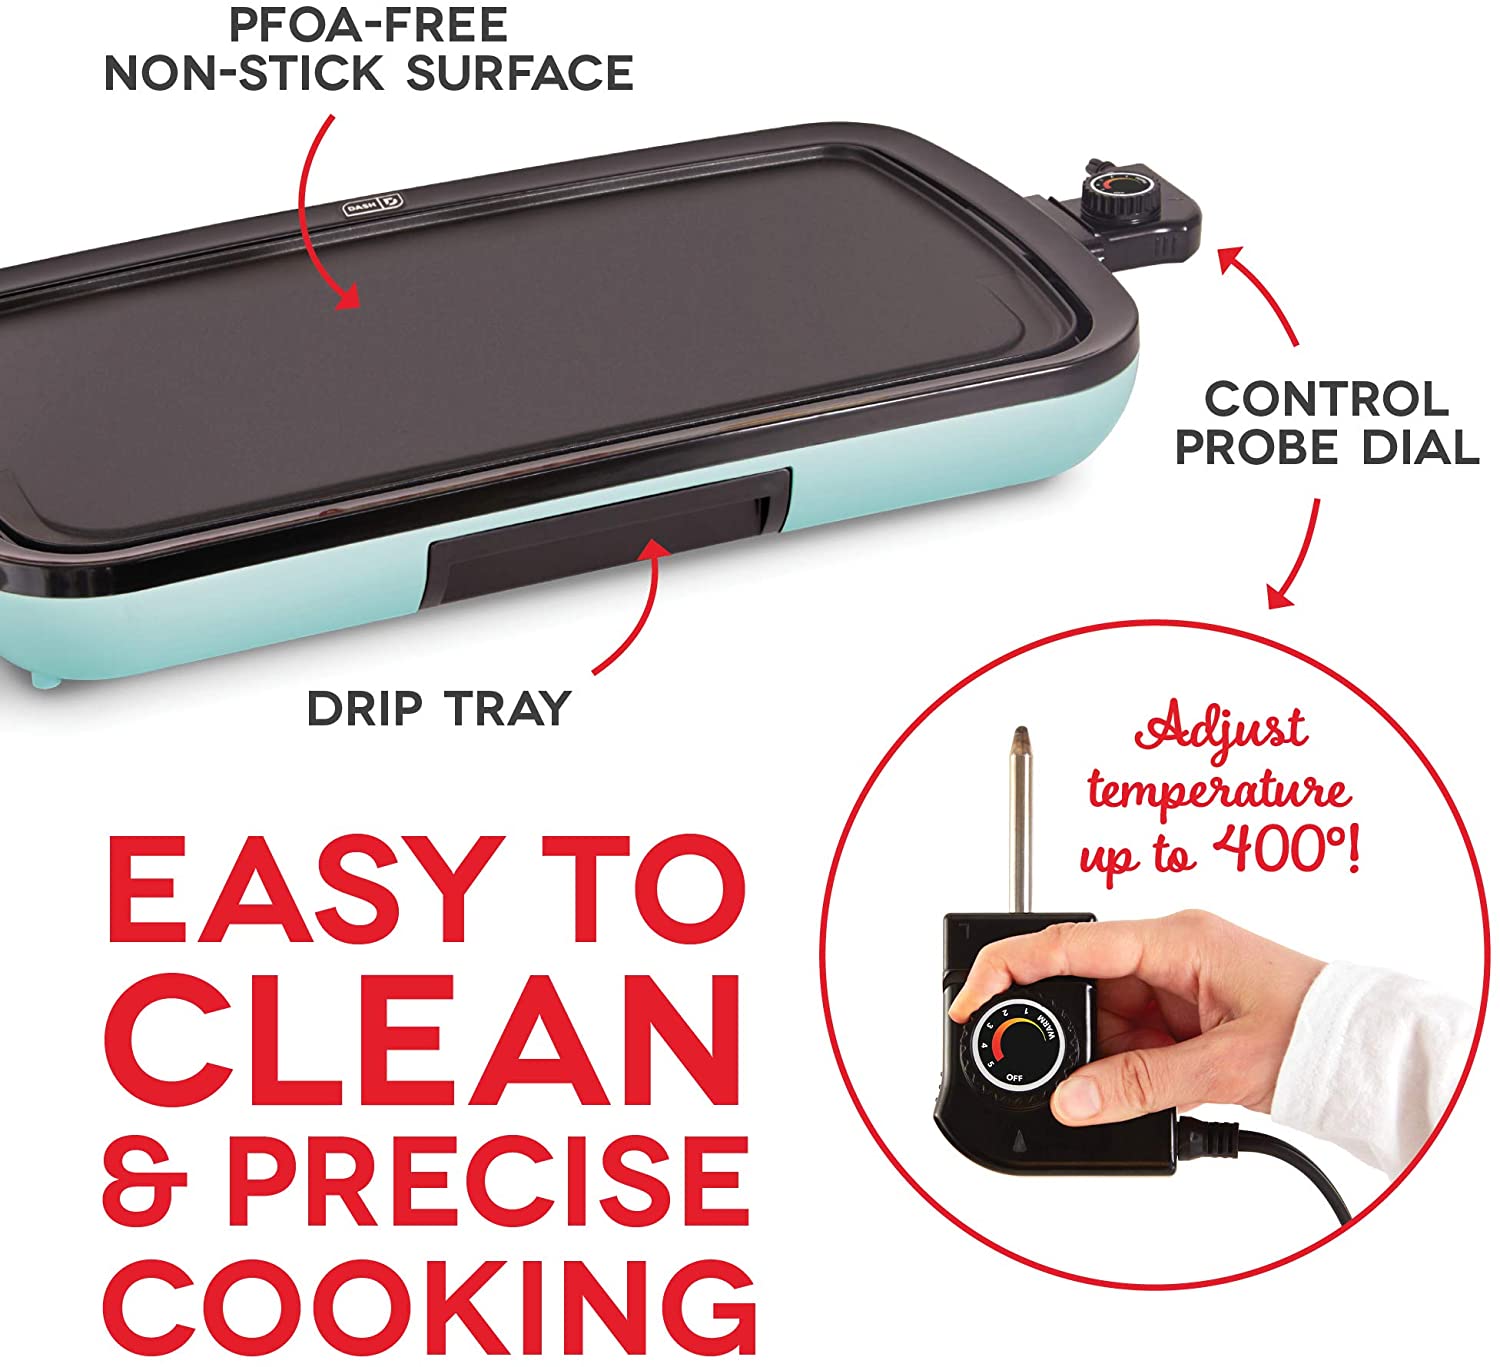 Dash's everyday electric griddle handles family meals or food on the